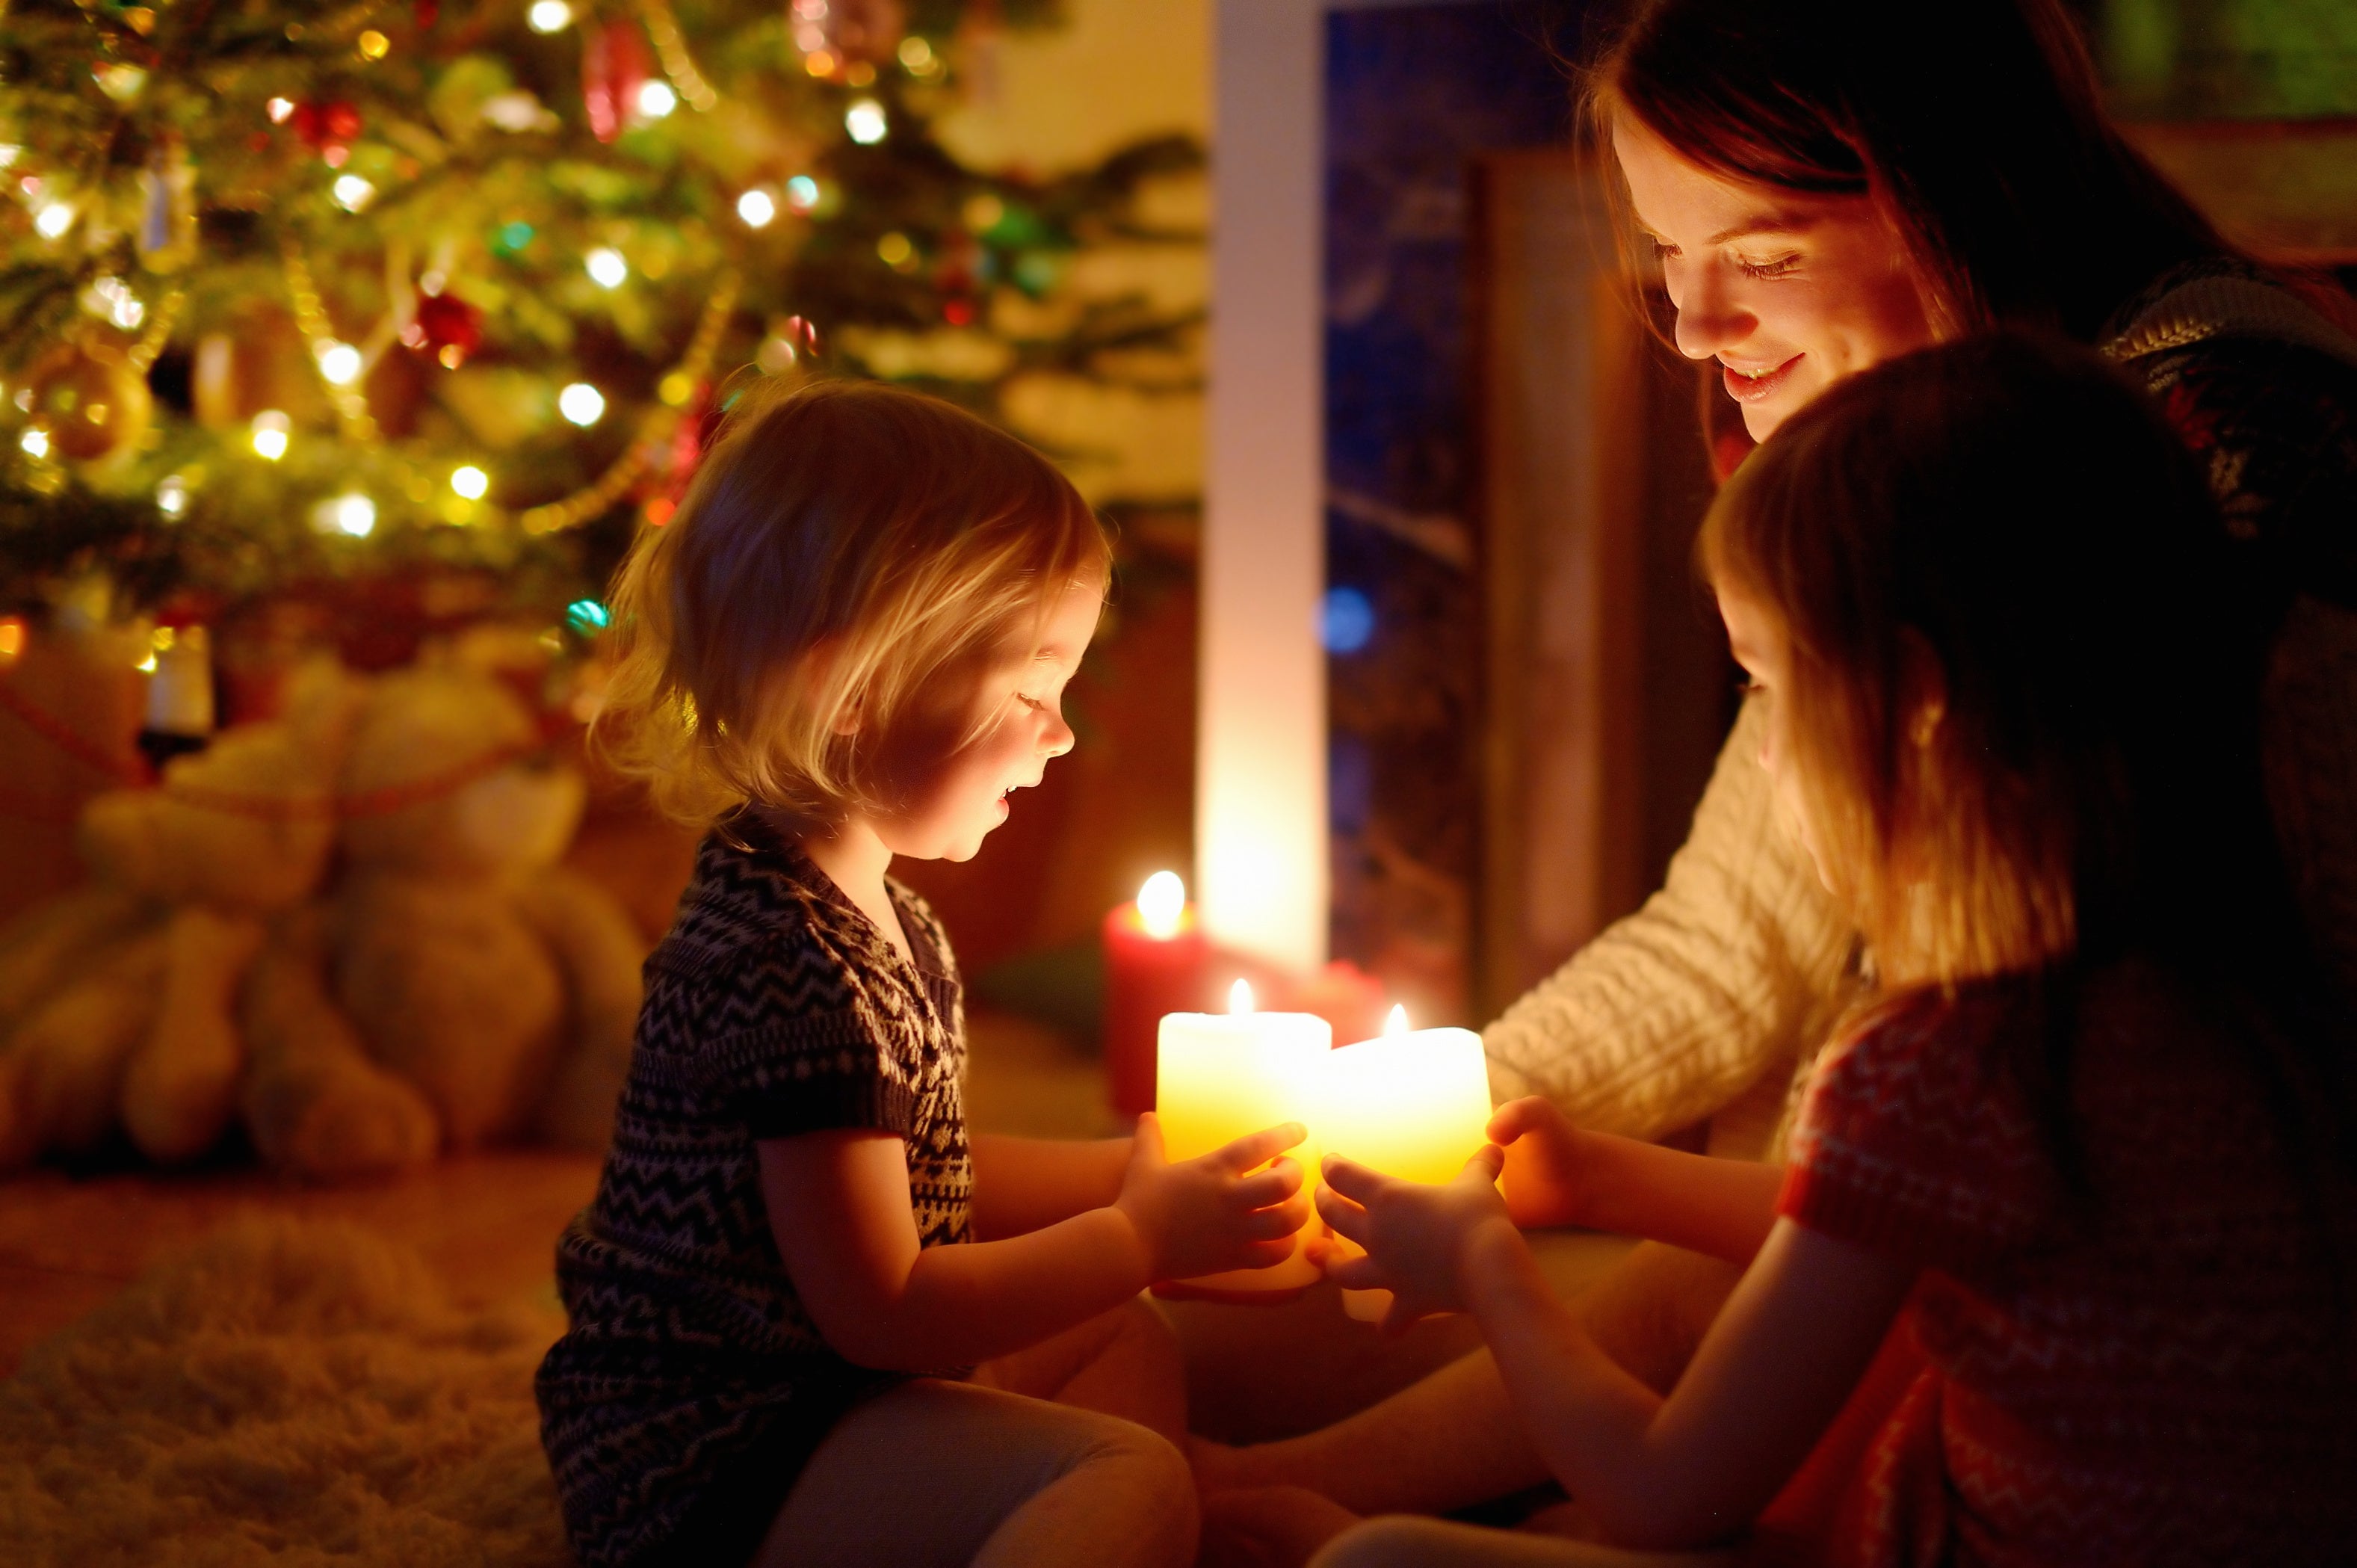 Woman and children holding lit candles in front of the Christmas tree at night - holiday photography example